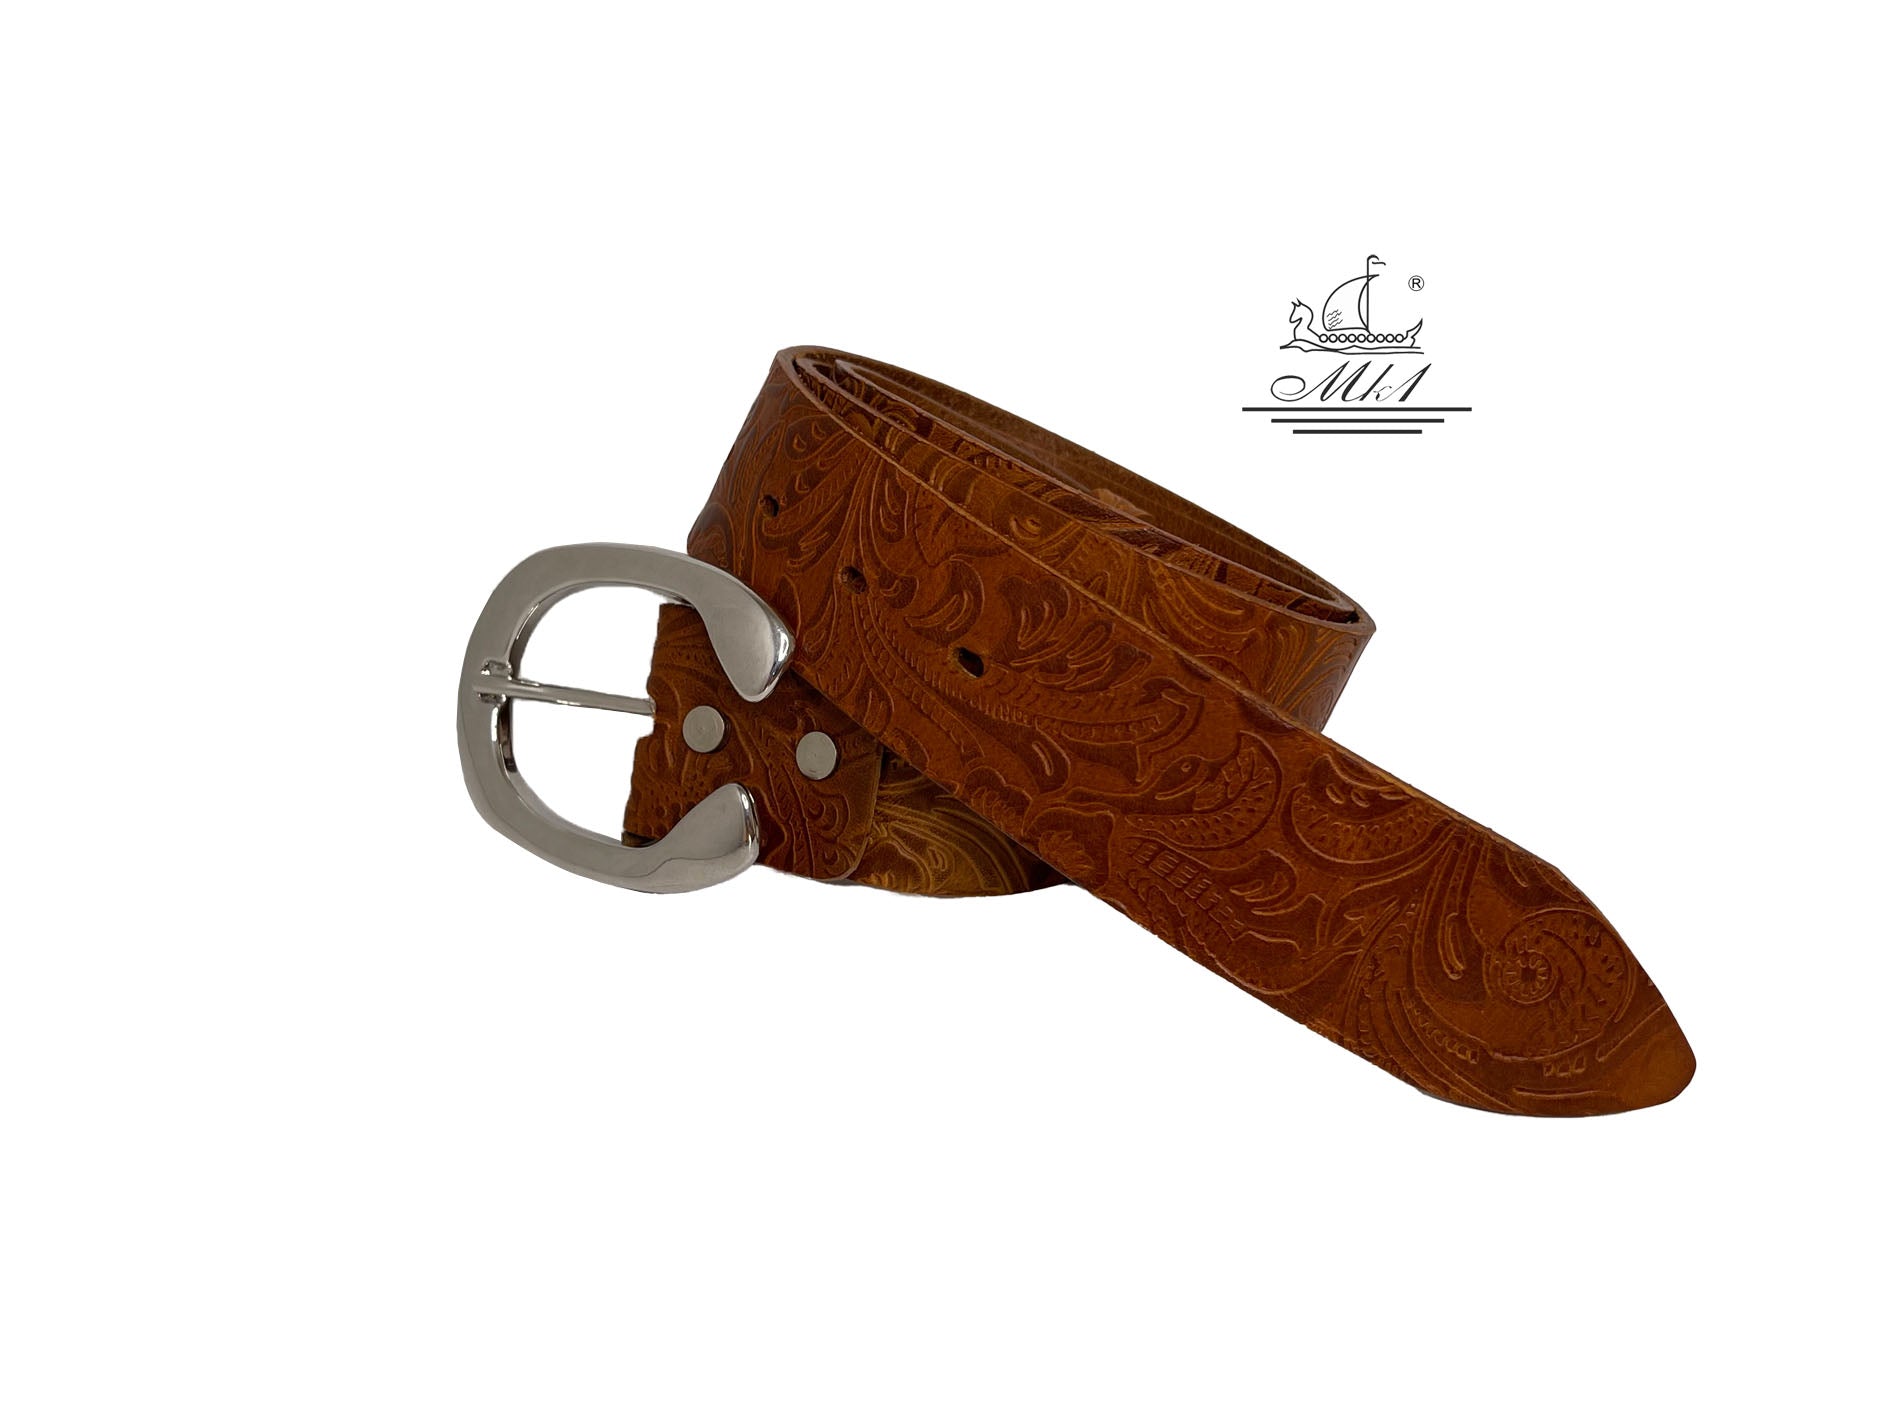 Unisex 4cm wide belt handcrafted from light brown leather with flower design. 101294/40TB/LD